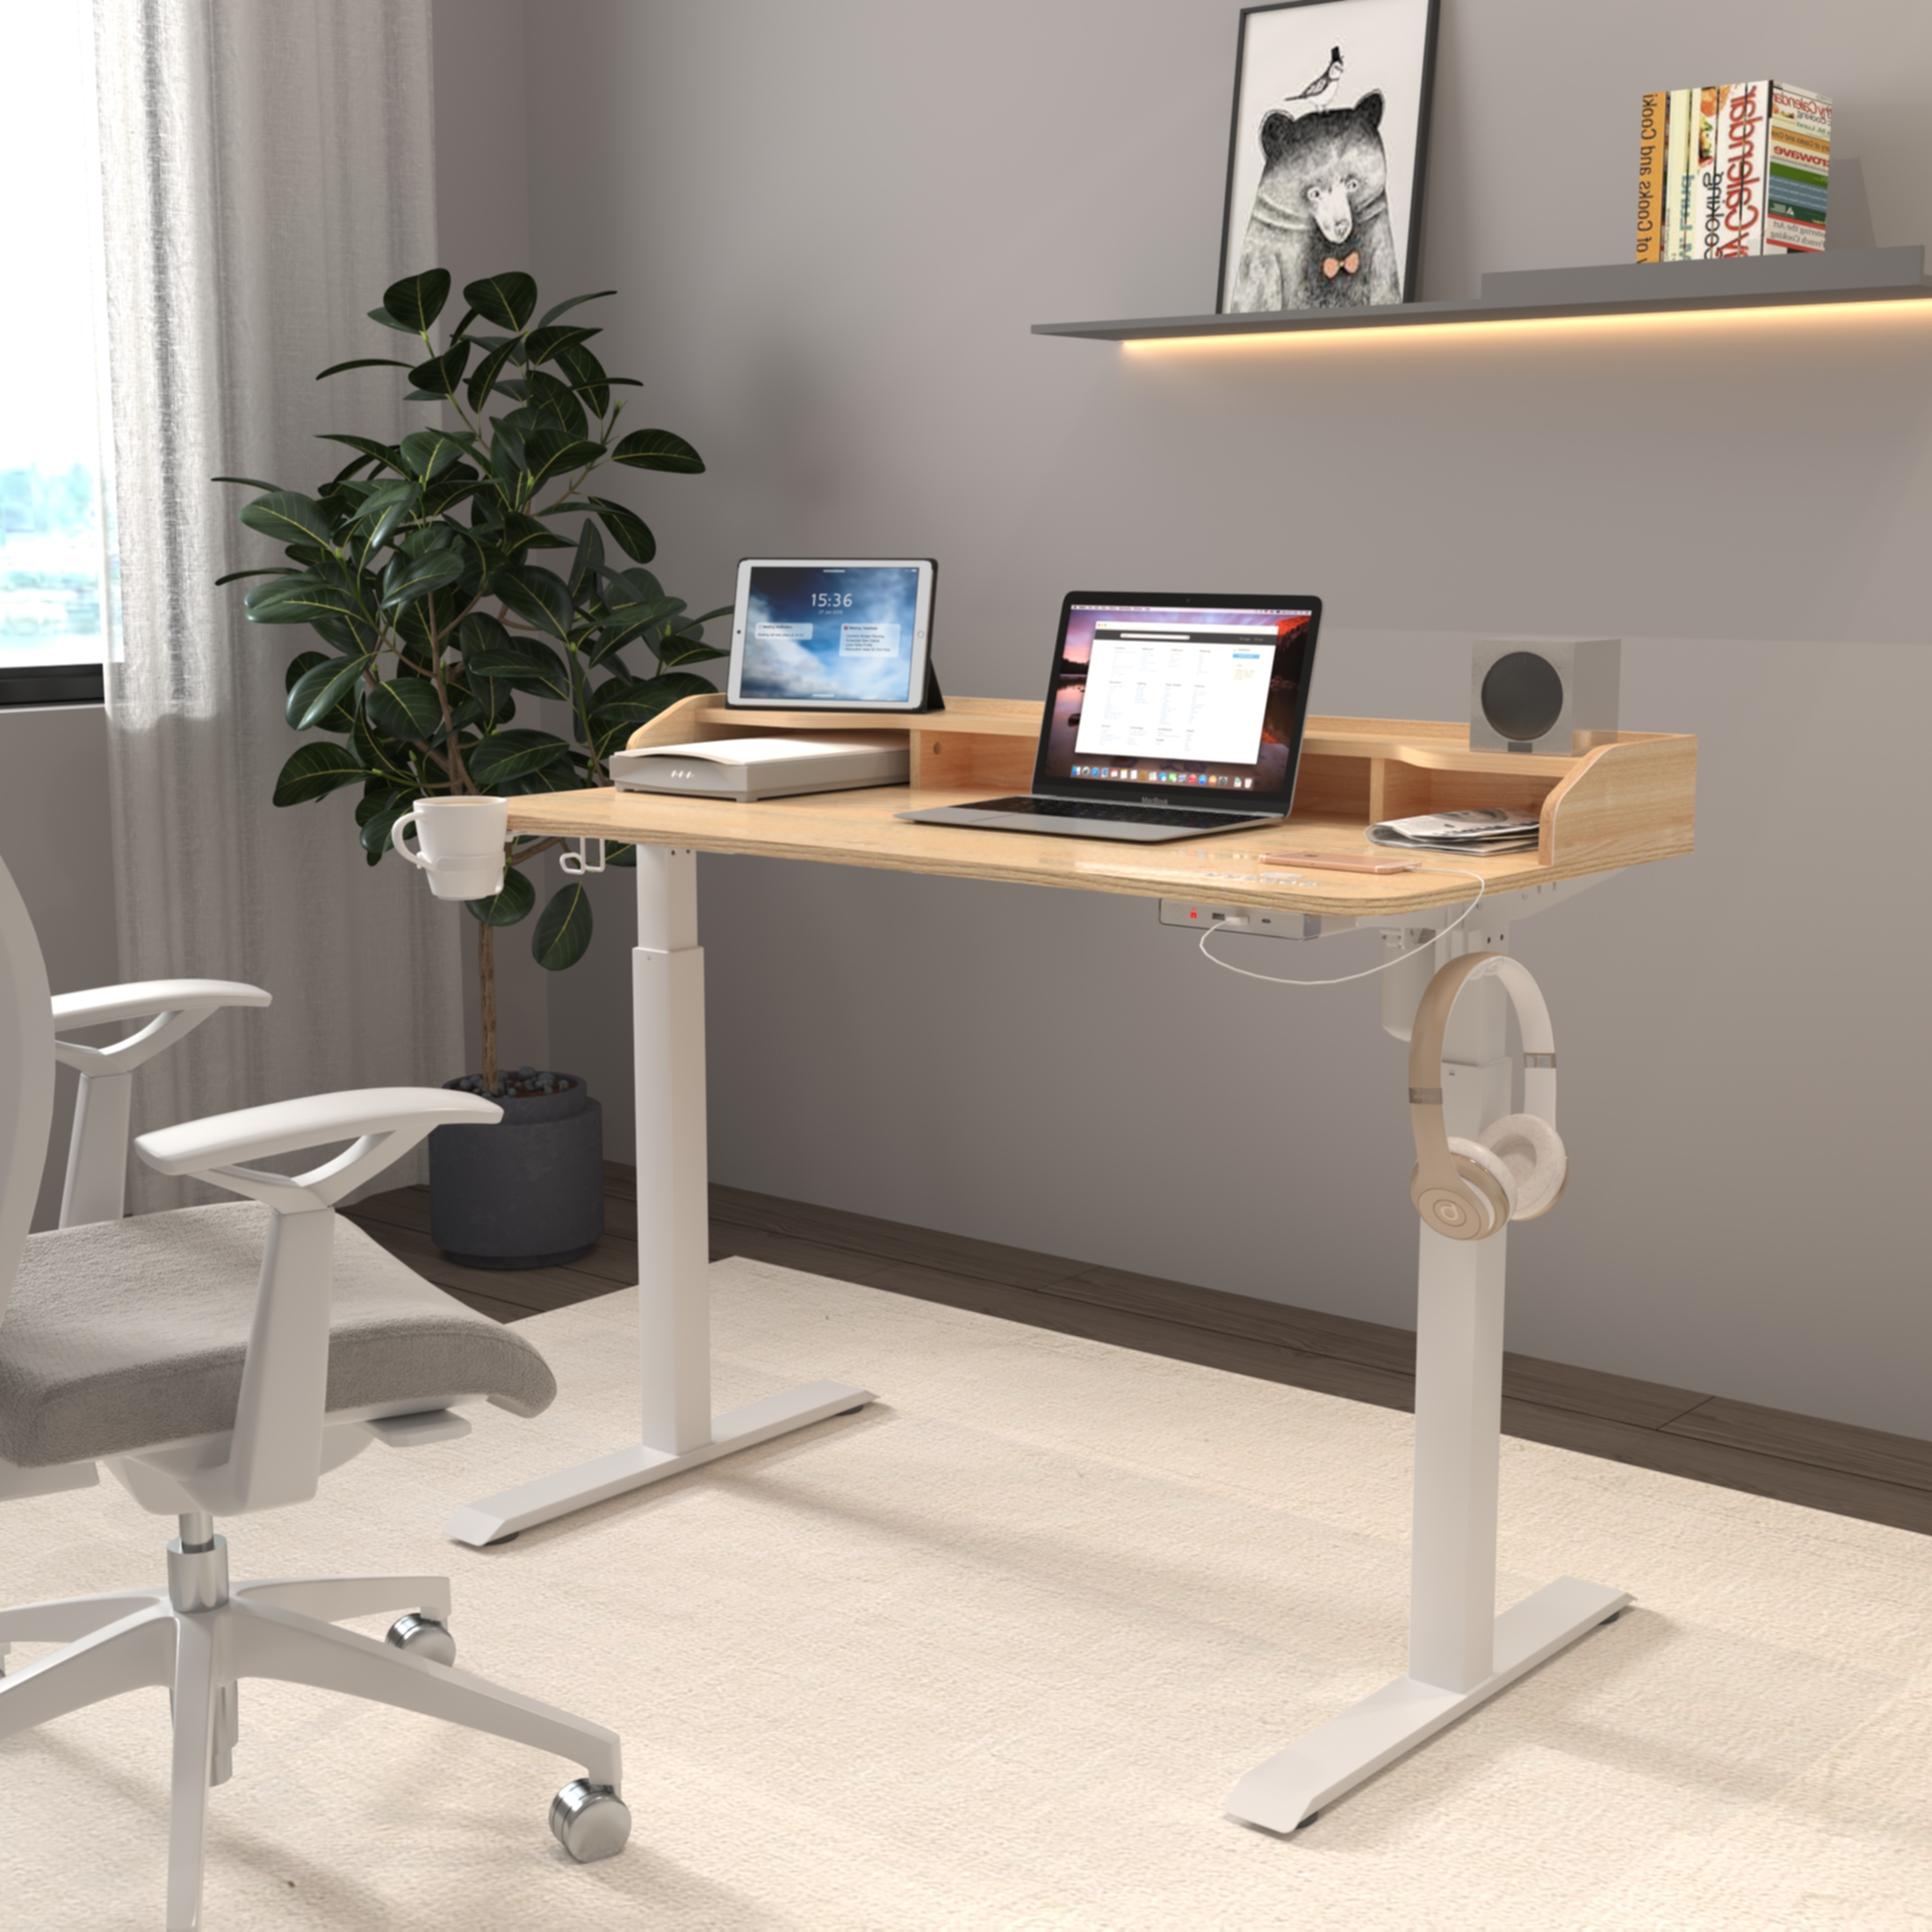 Mainstays Height Adjustable Standing Desk with USB  Type C in Wood Color Height 28 to 47 inches - image 2 of 12